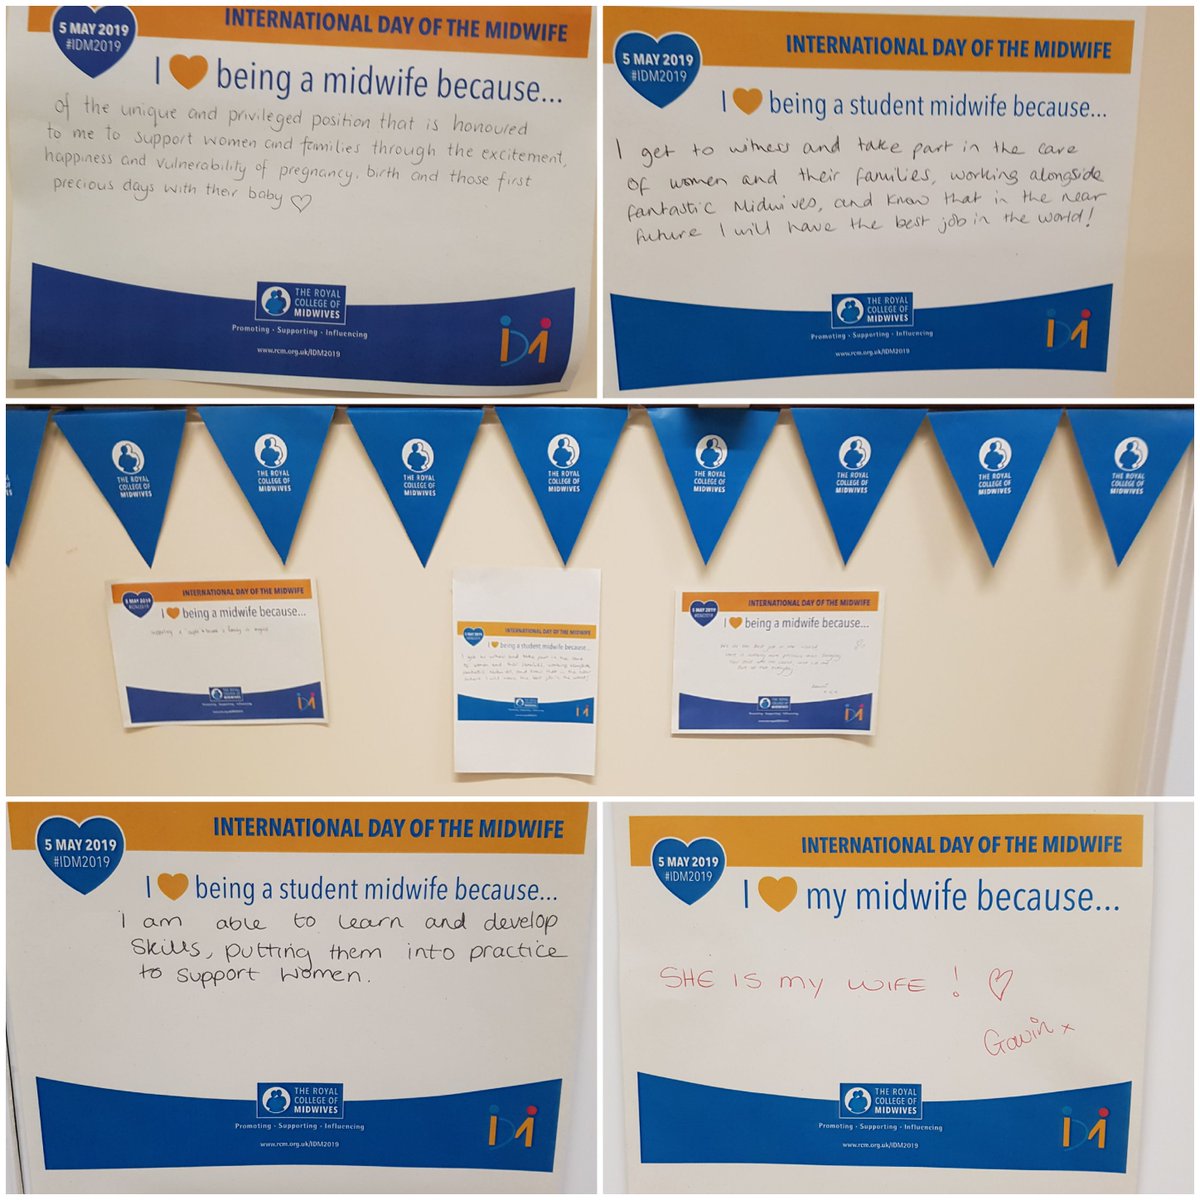 Celebrating ourselves and each other on International Midwives Day! 🥳 
Working hard but managed time for a group pic 📸 

#IDM2019 #deliverysuite #BHH #celebrate #bunting #colleagues #teamwork #Ilovebeingamidwife #Ilovebeingastudentmidwife #dayshift #withwoman #babiesofbrum